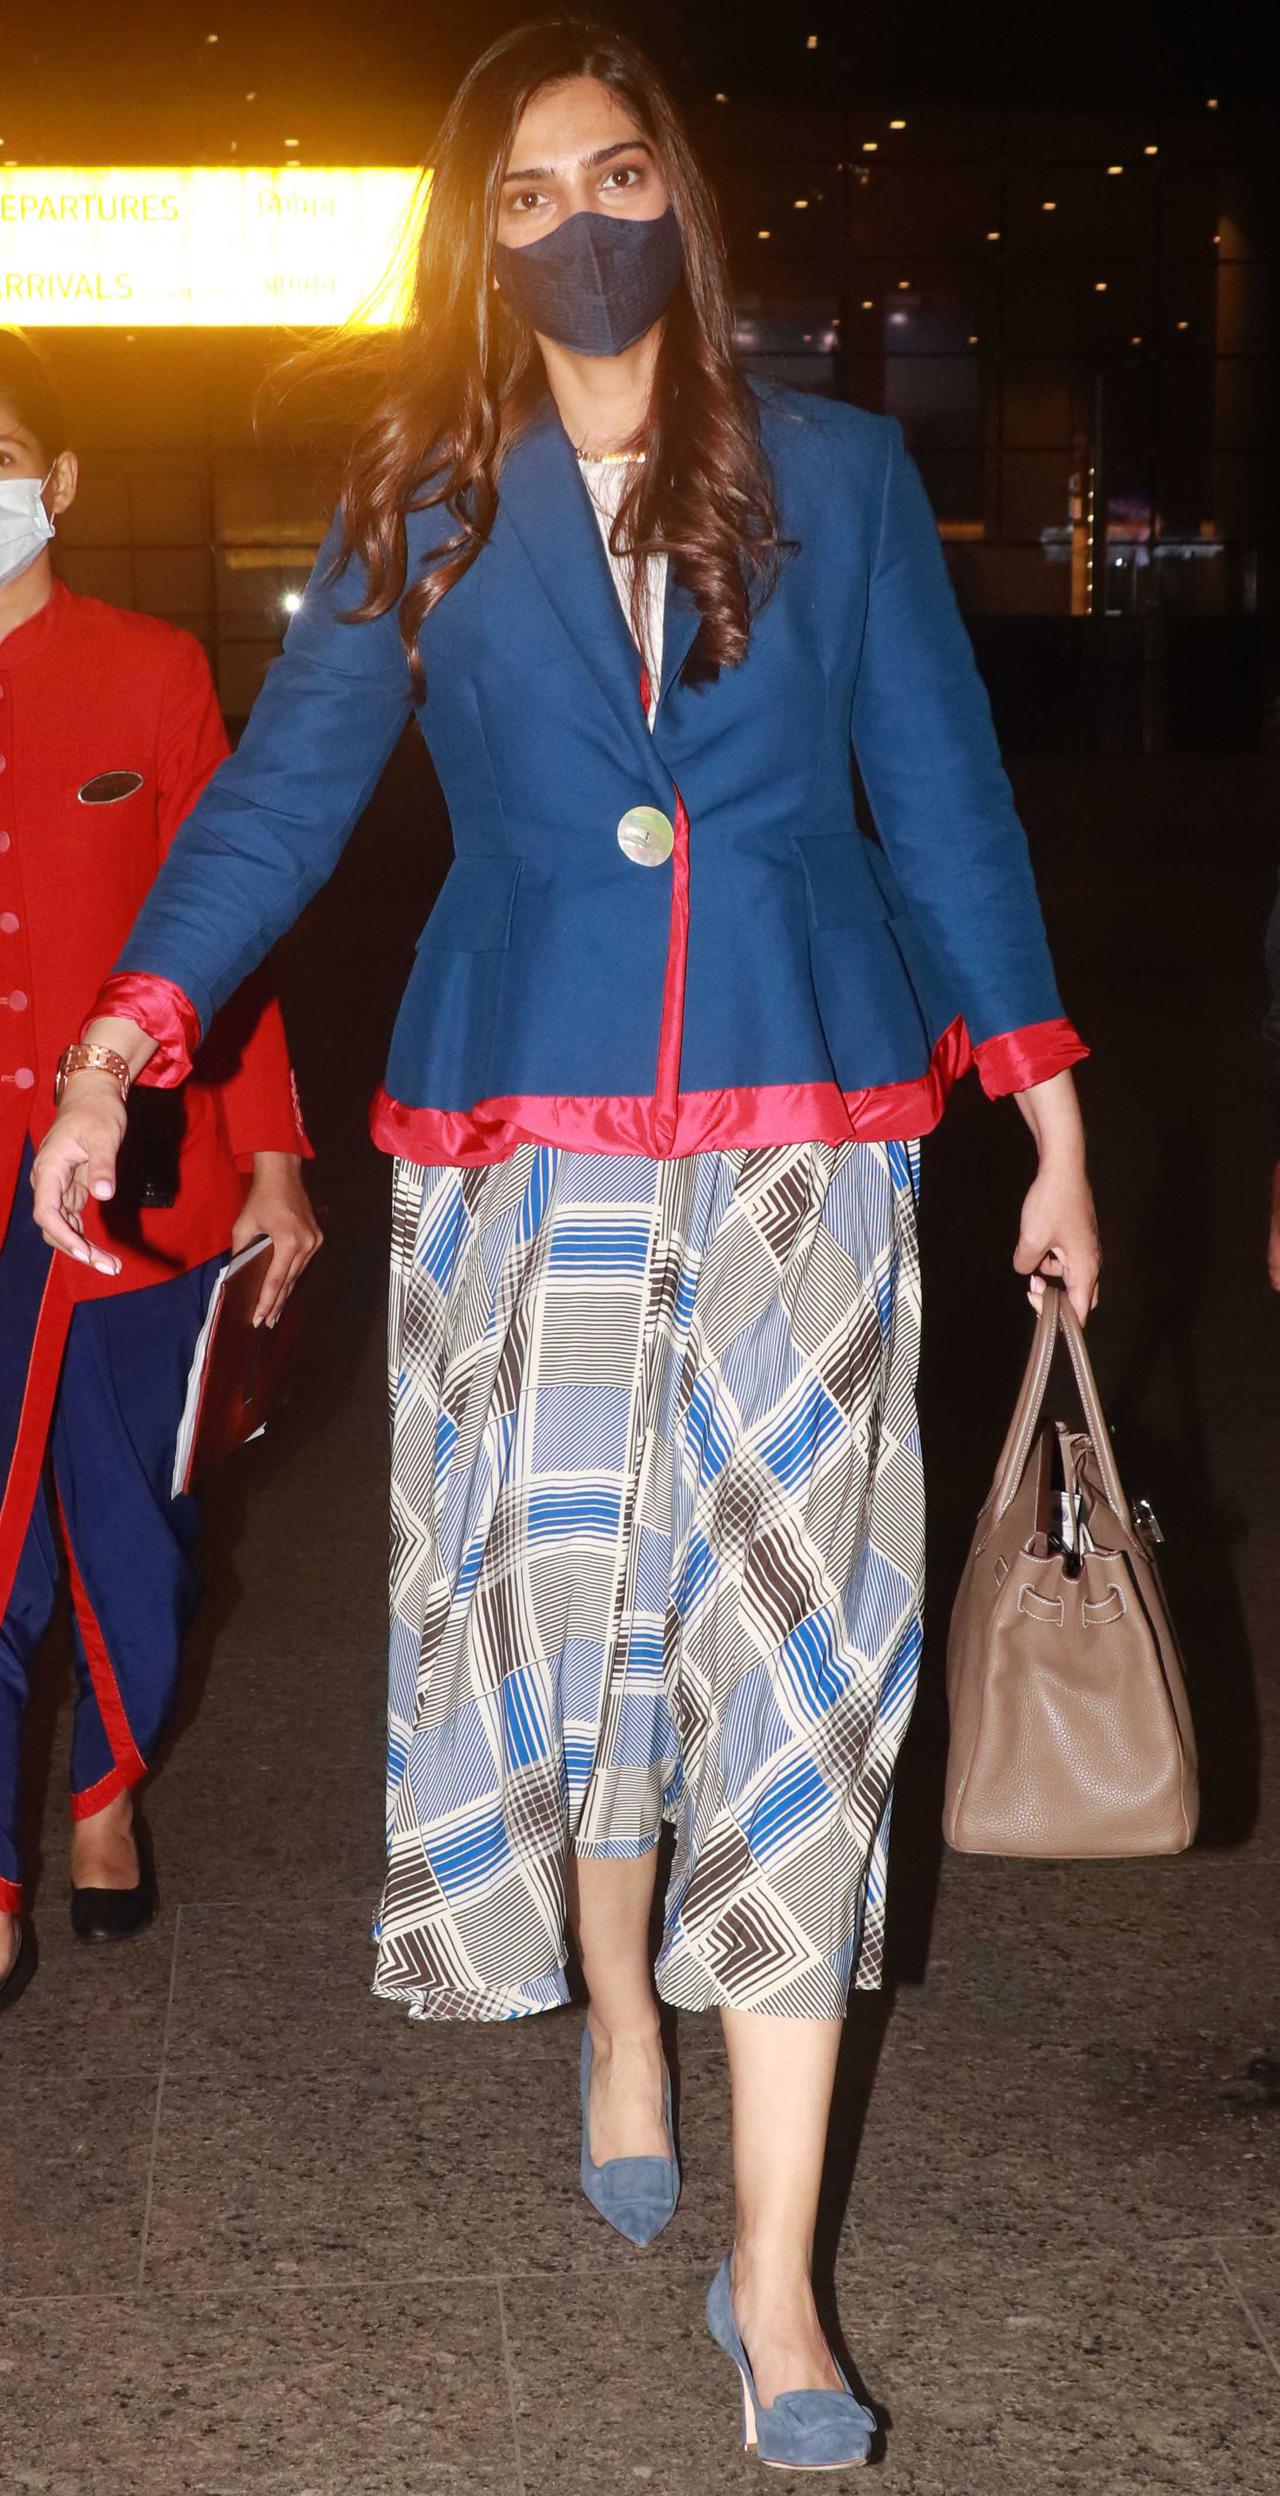 Sonam Kapoor Ahuja was clicked in a navy blue jacket and geometric printed dress as she arrived at the Mumbai airport. She returned to the bay after spending months in London.